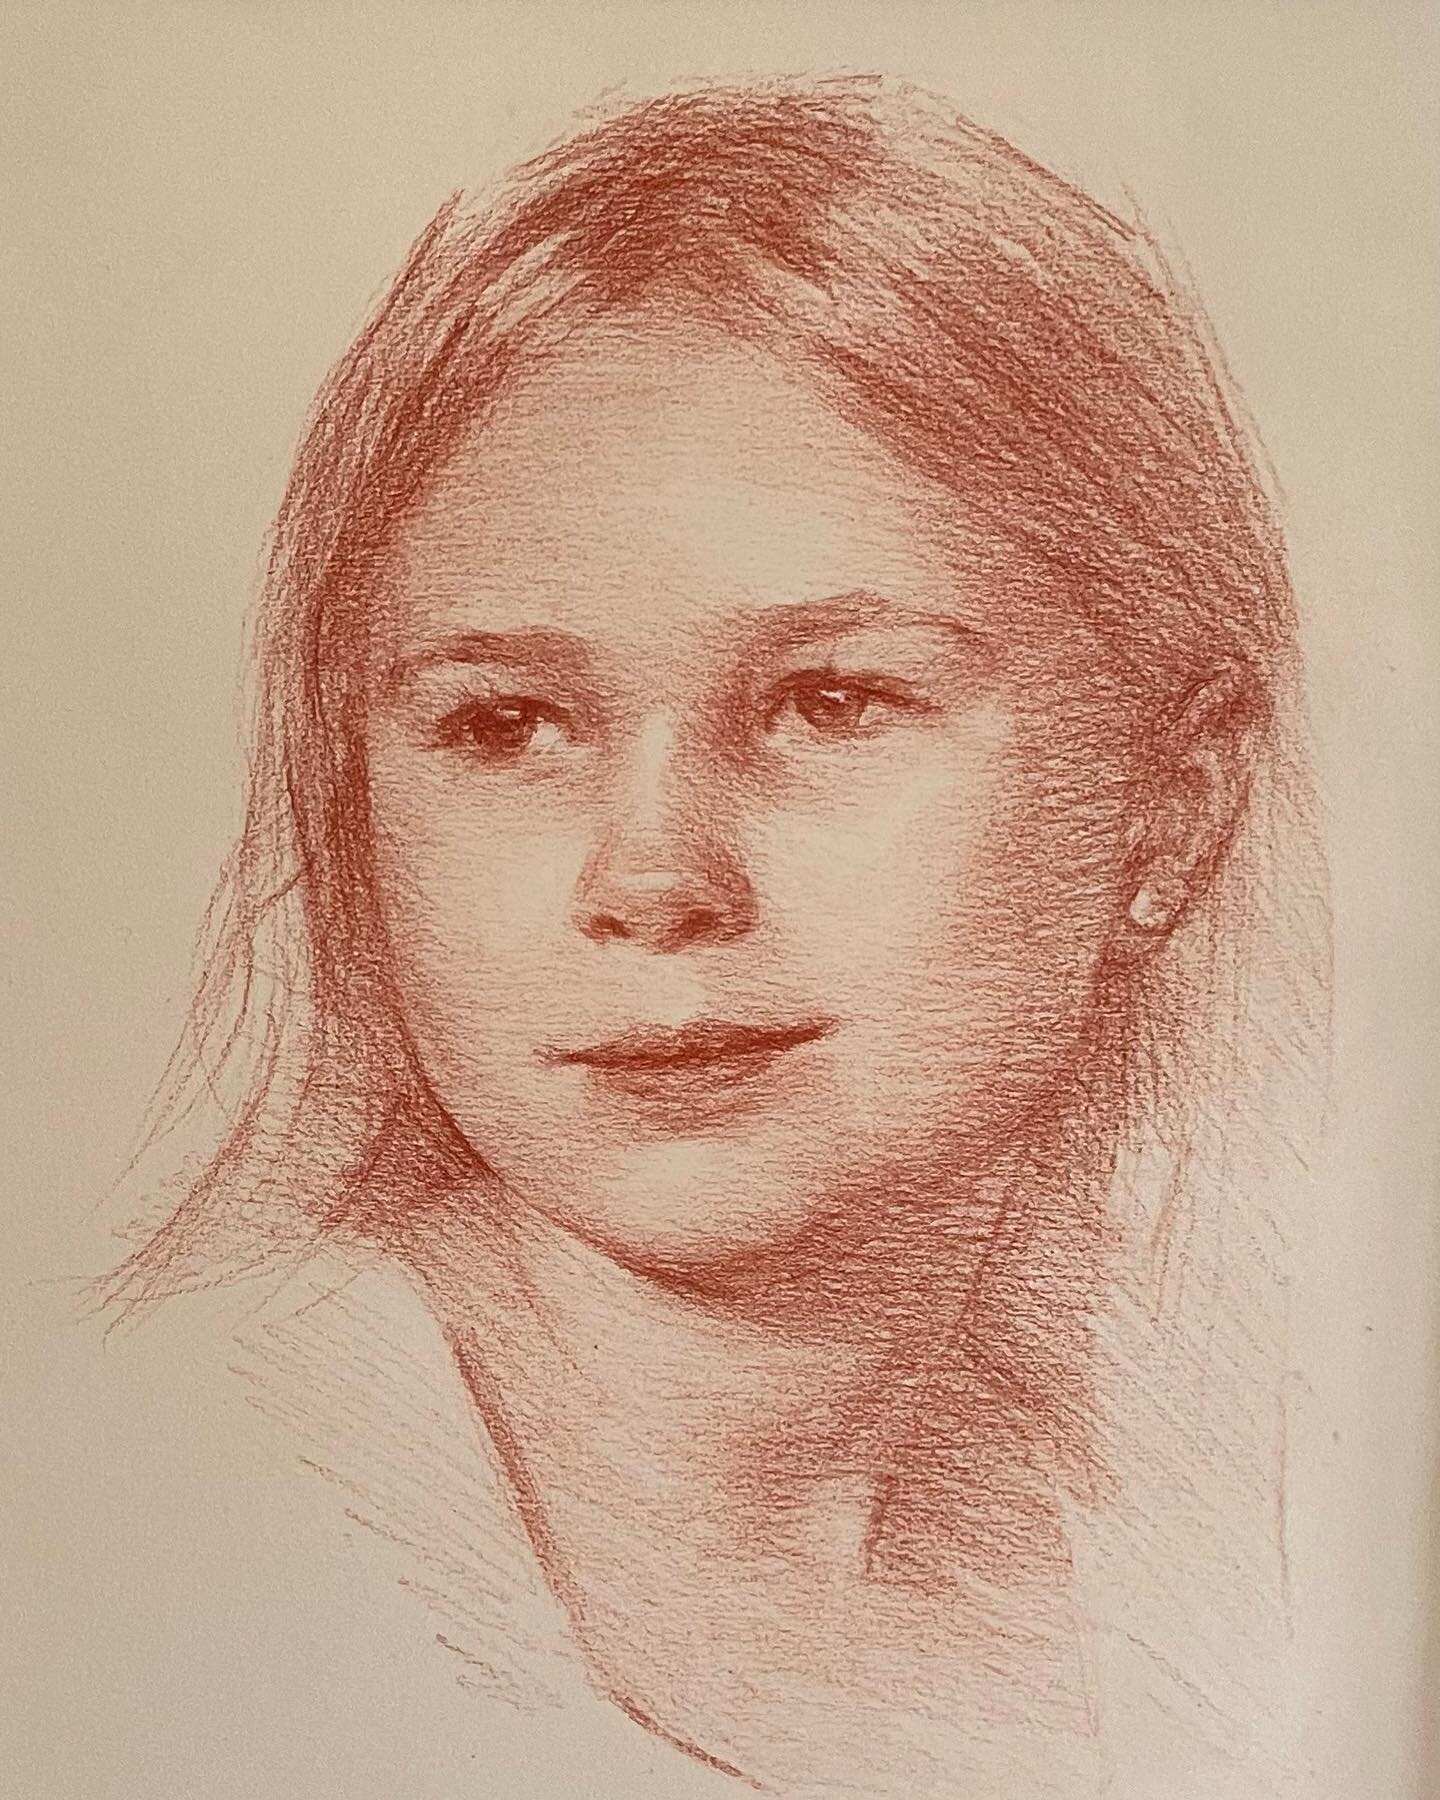 Red chalk on tinted paper  #commission #redchalkdrawing #drawing #portrait #portraitdrawing #artist